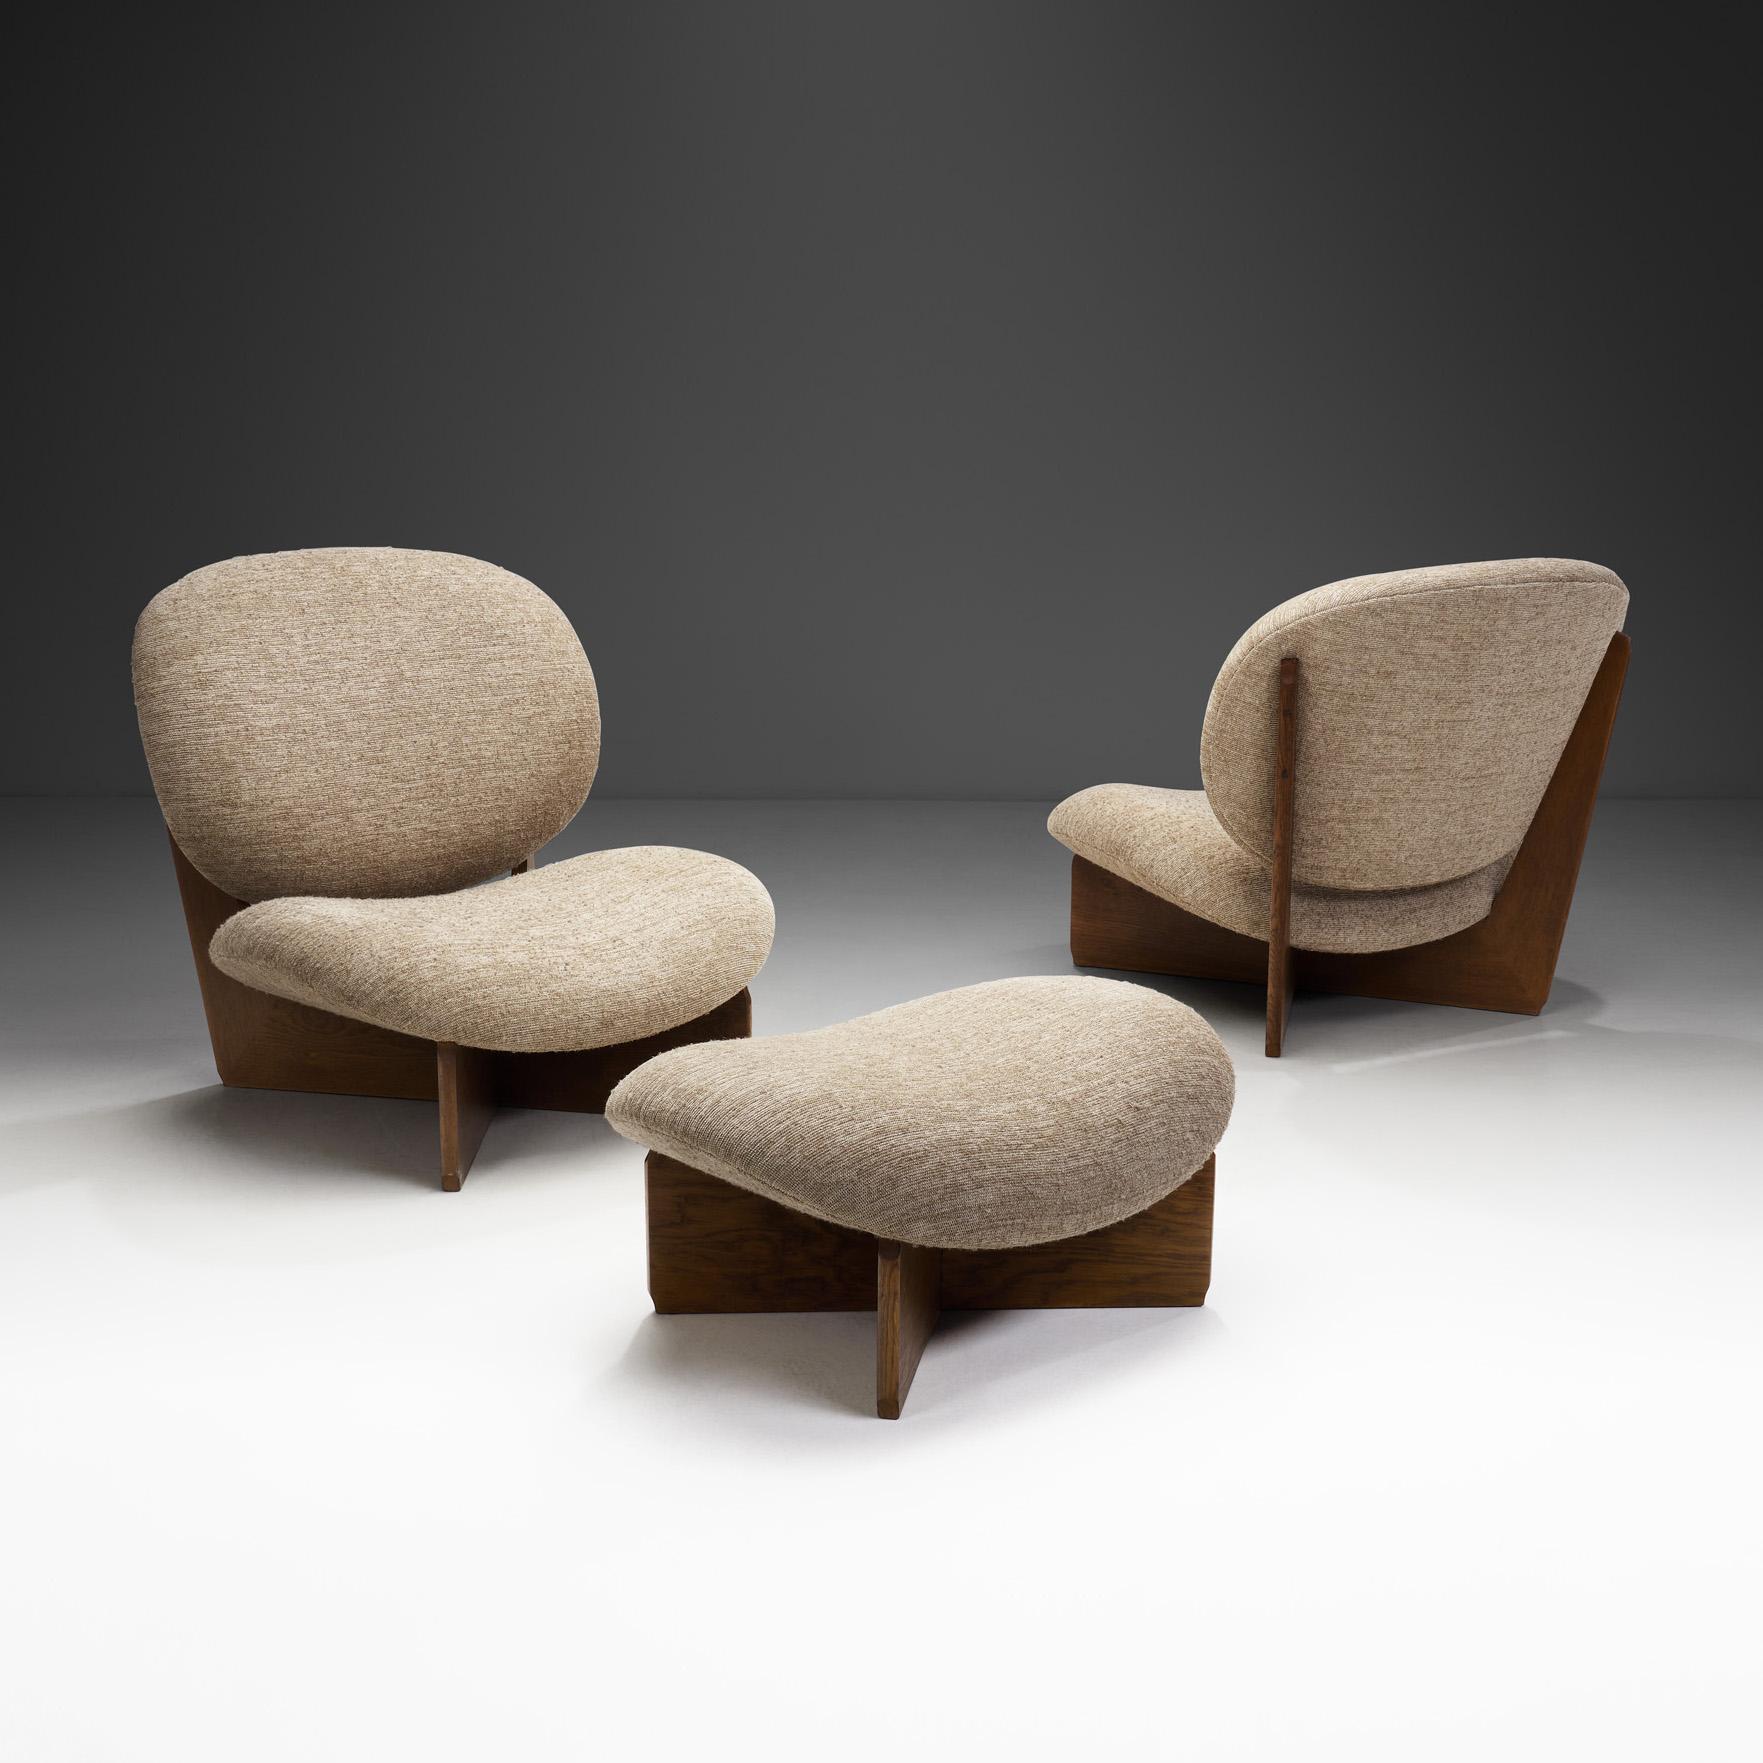 European Set of Mid-Century Modern Lounge Chairs and Footstool, Europe Late 20th Century For Sale